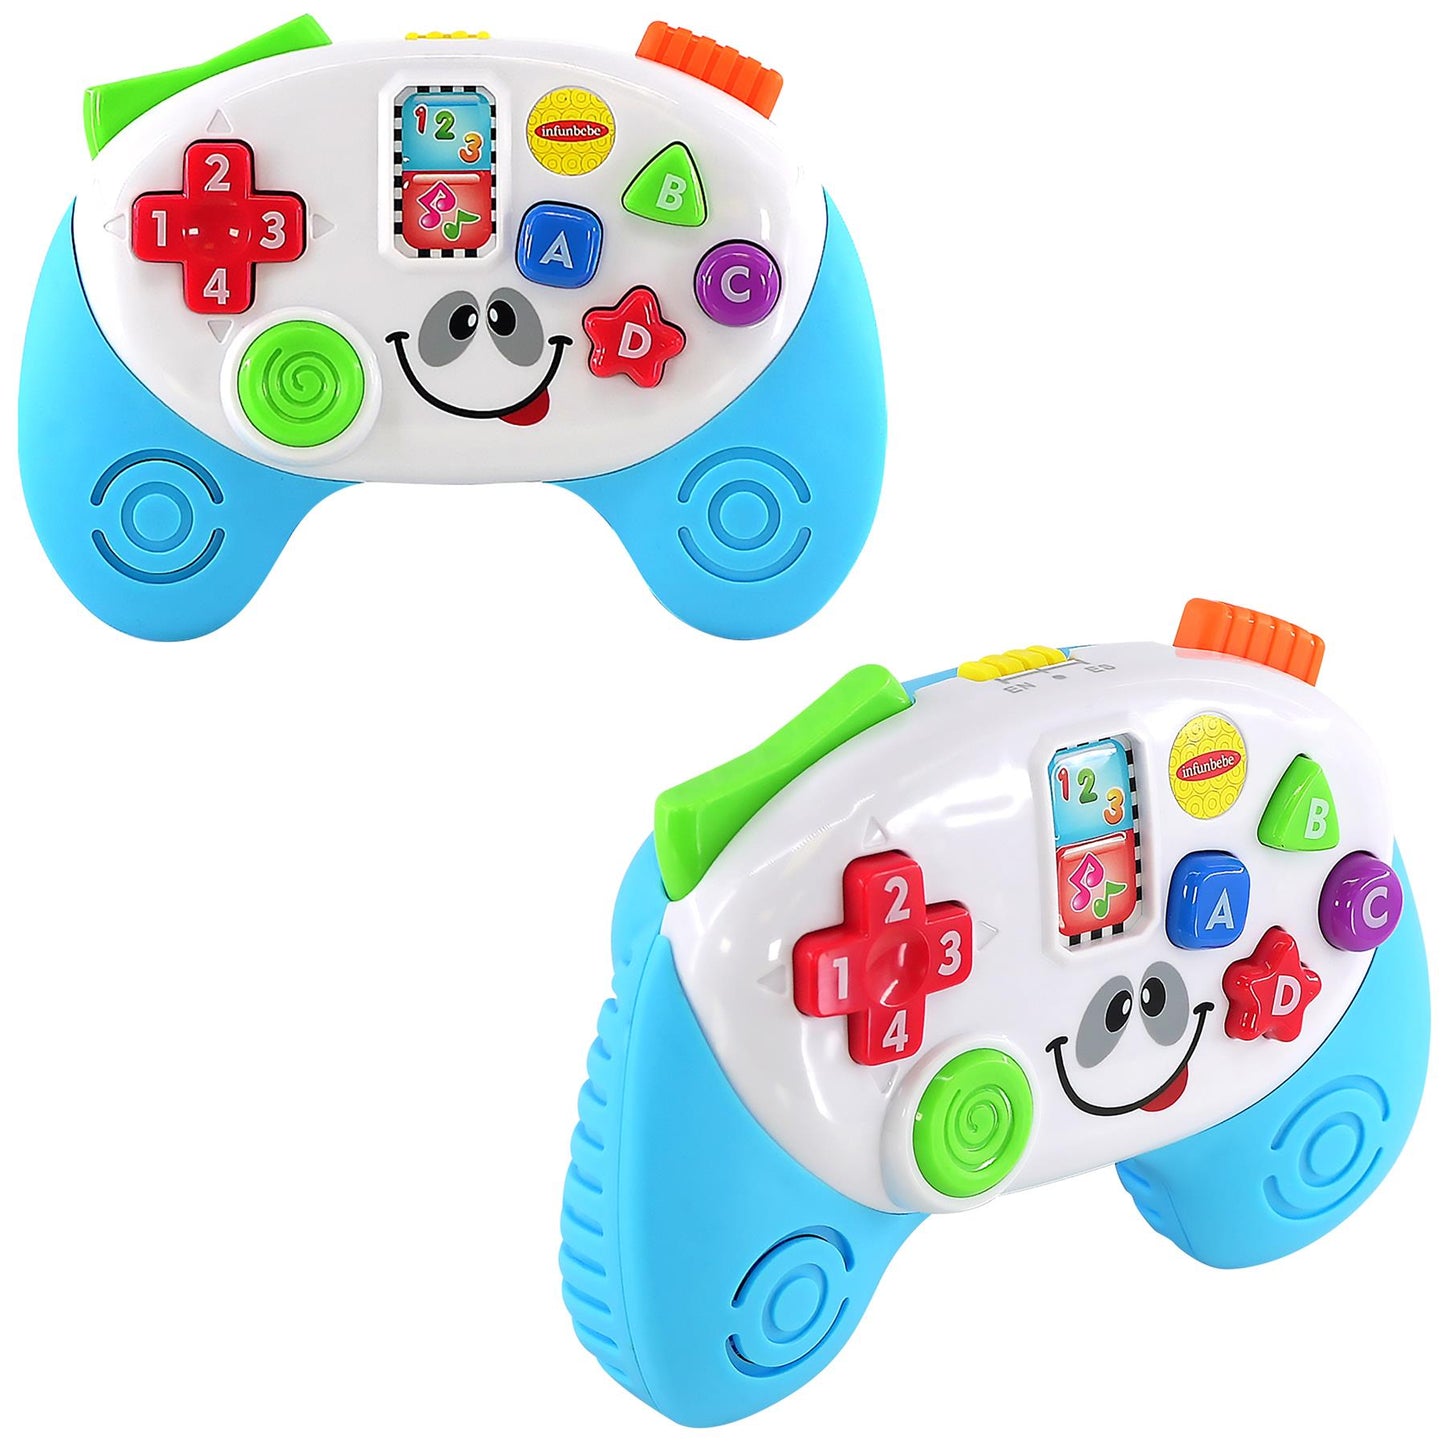 Baby Learning Musical Controller Toy Game by The Magic Toy Shop - UKBuyZone